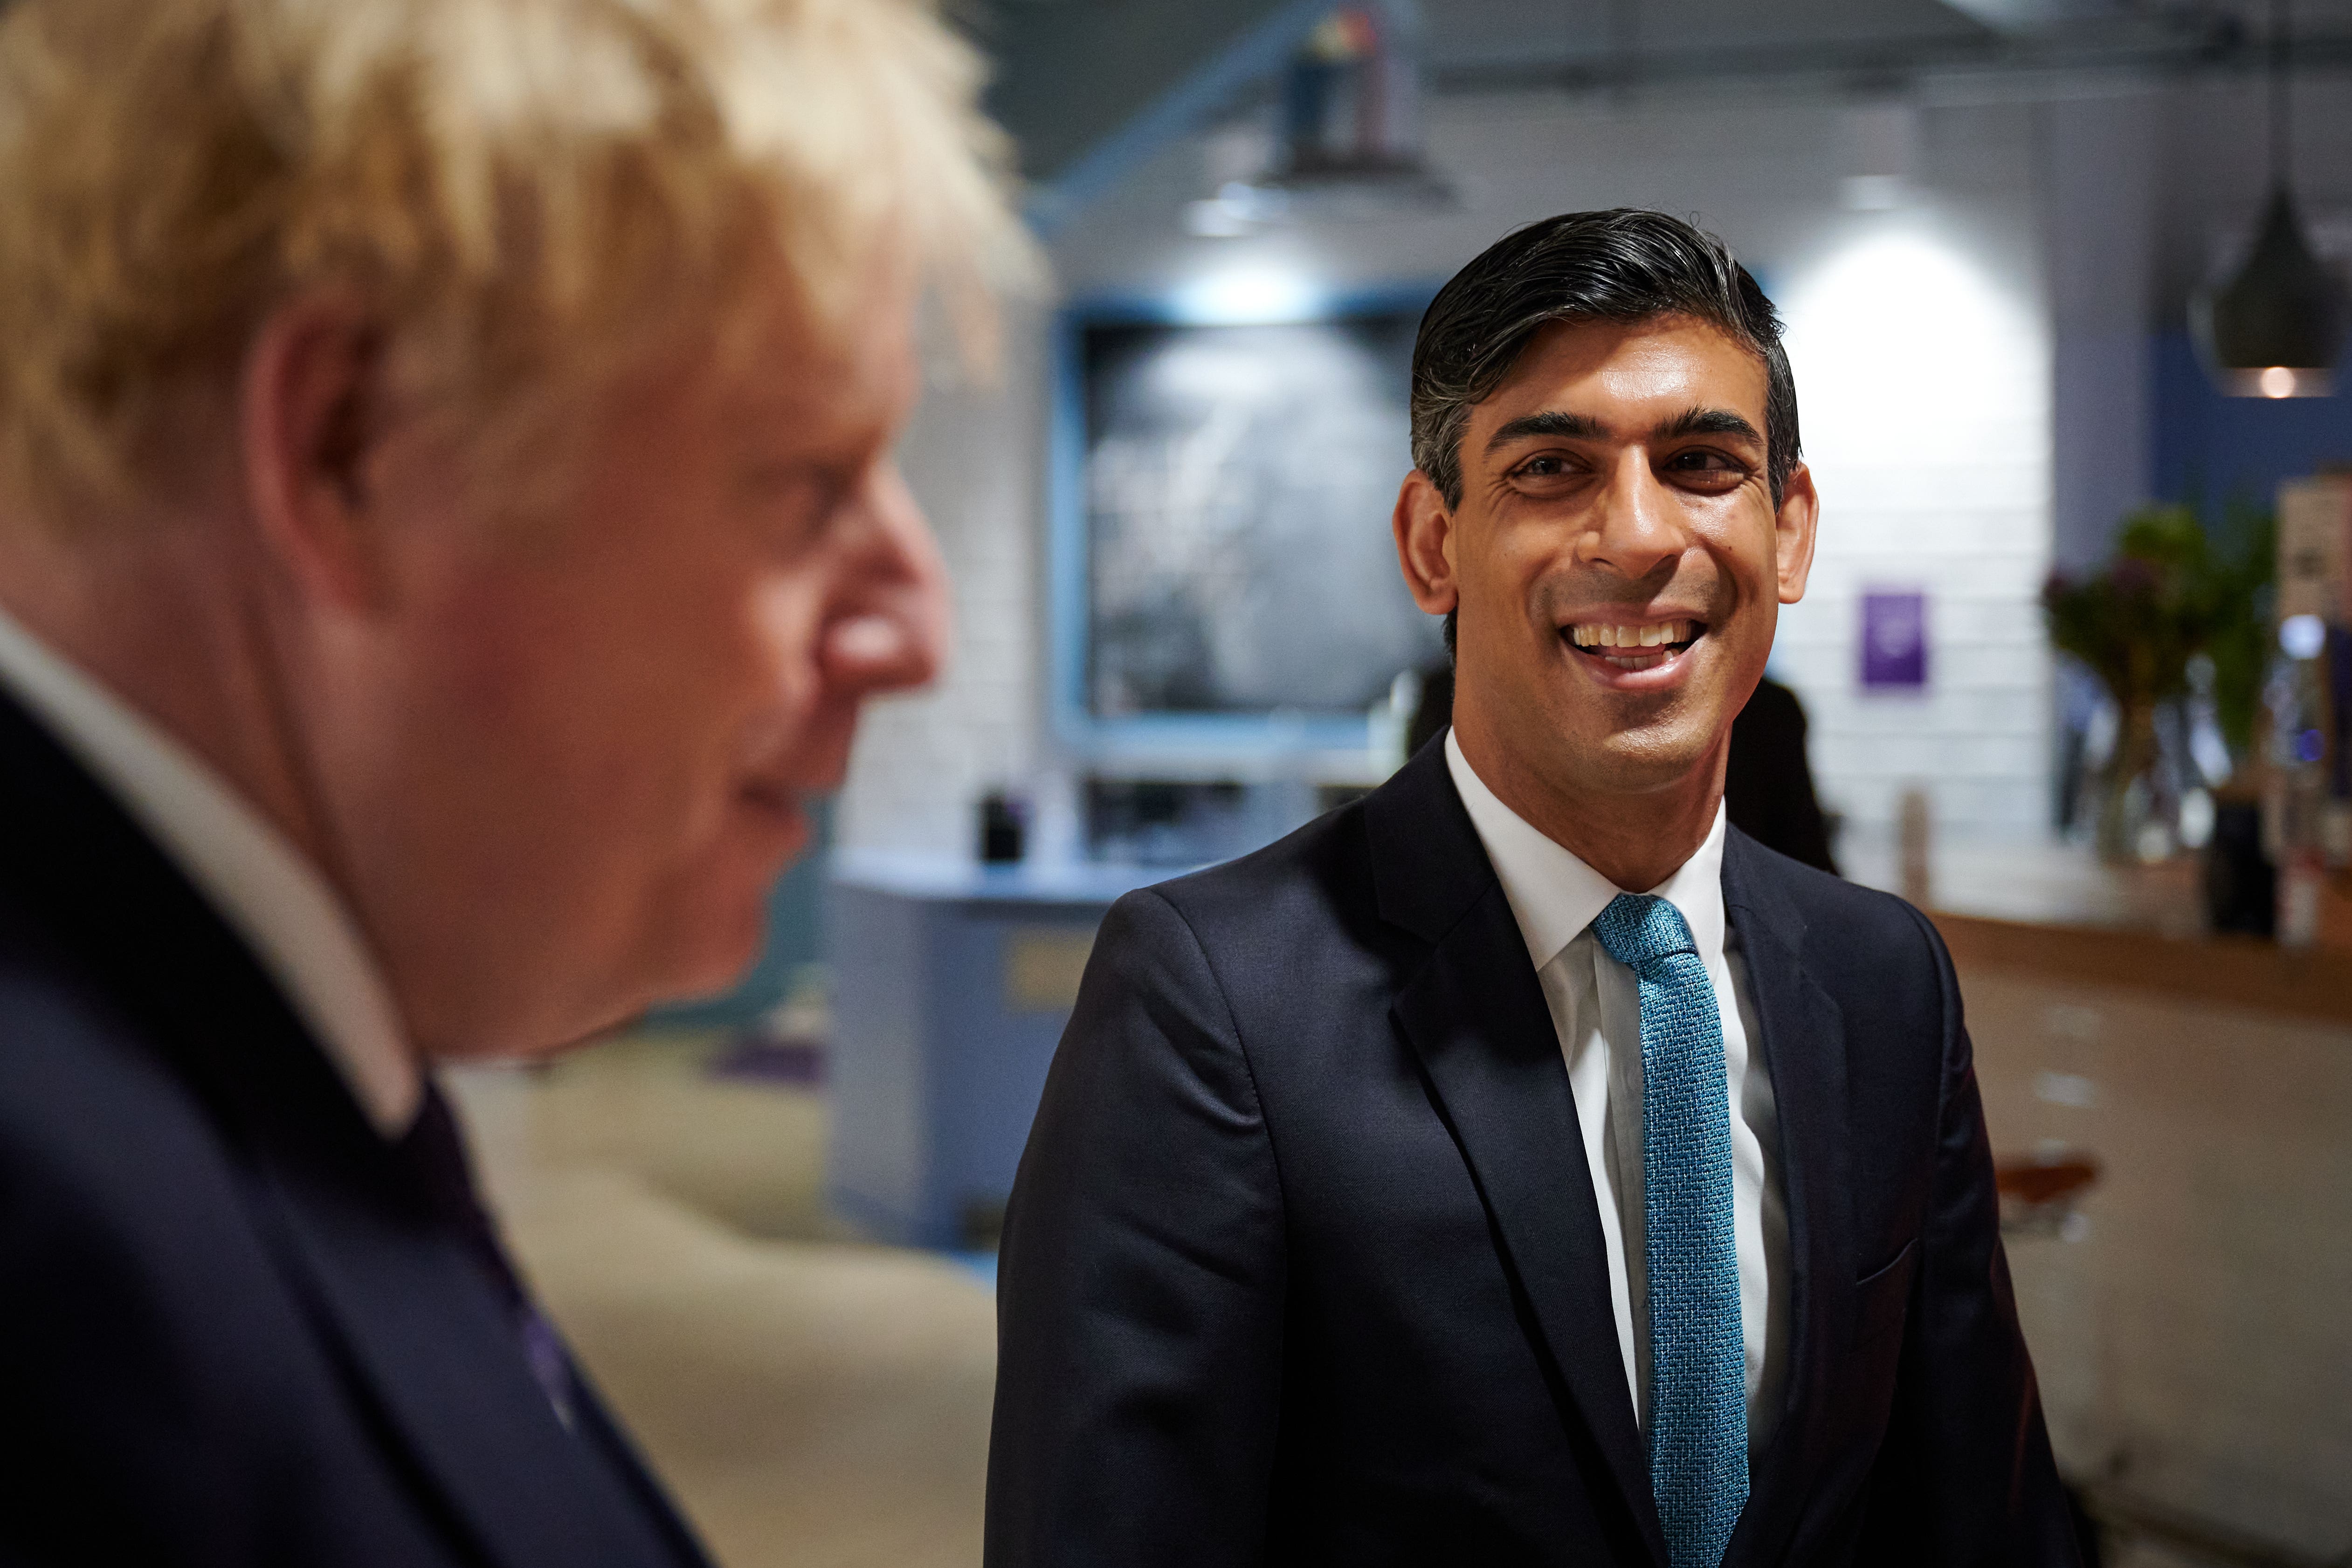 Boris Johnson allies furious at Rishi Sunak over government dossier handed to police